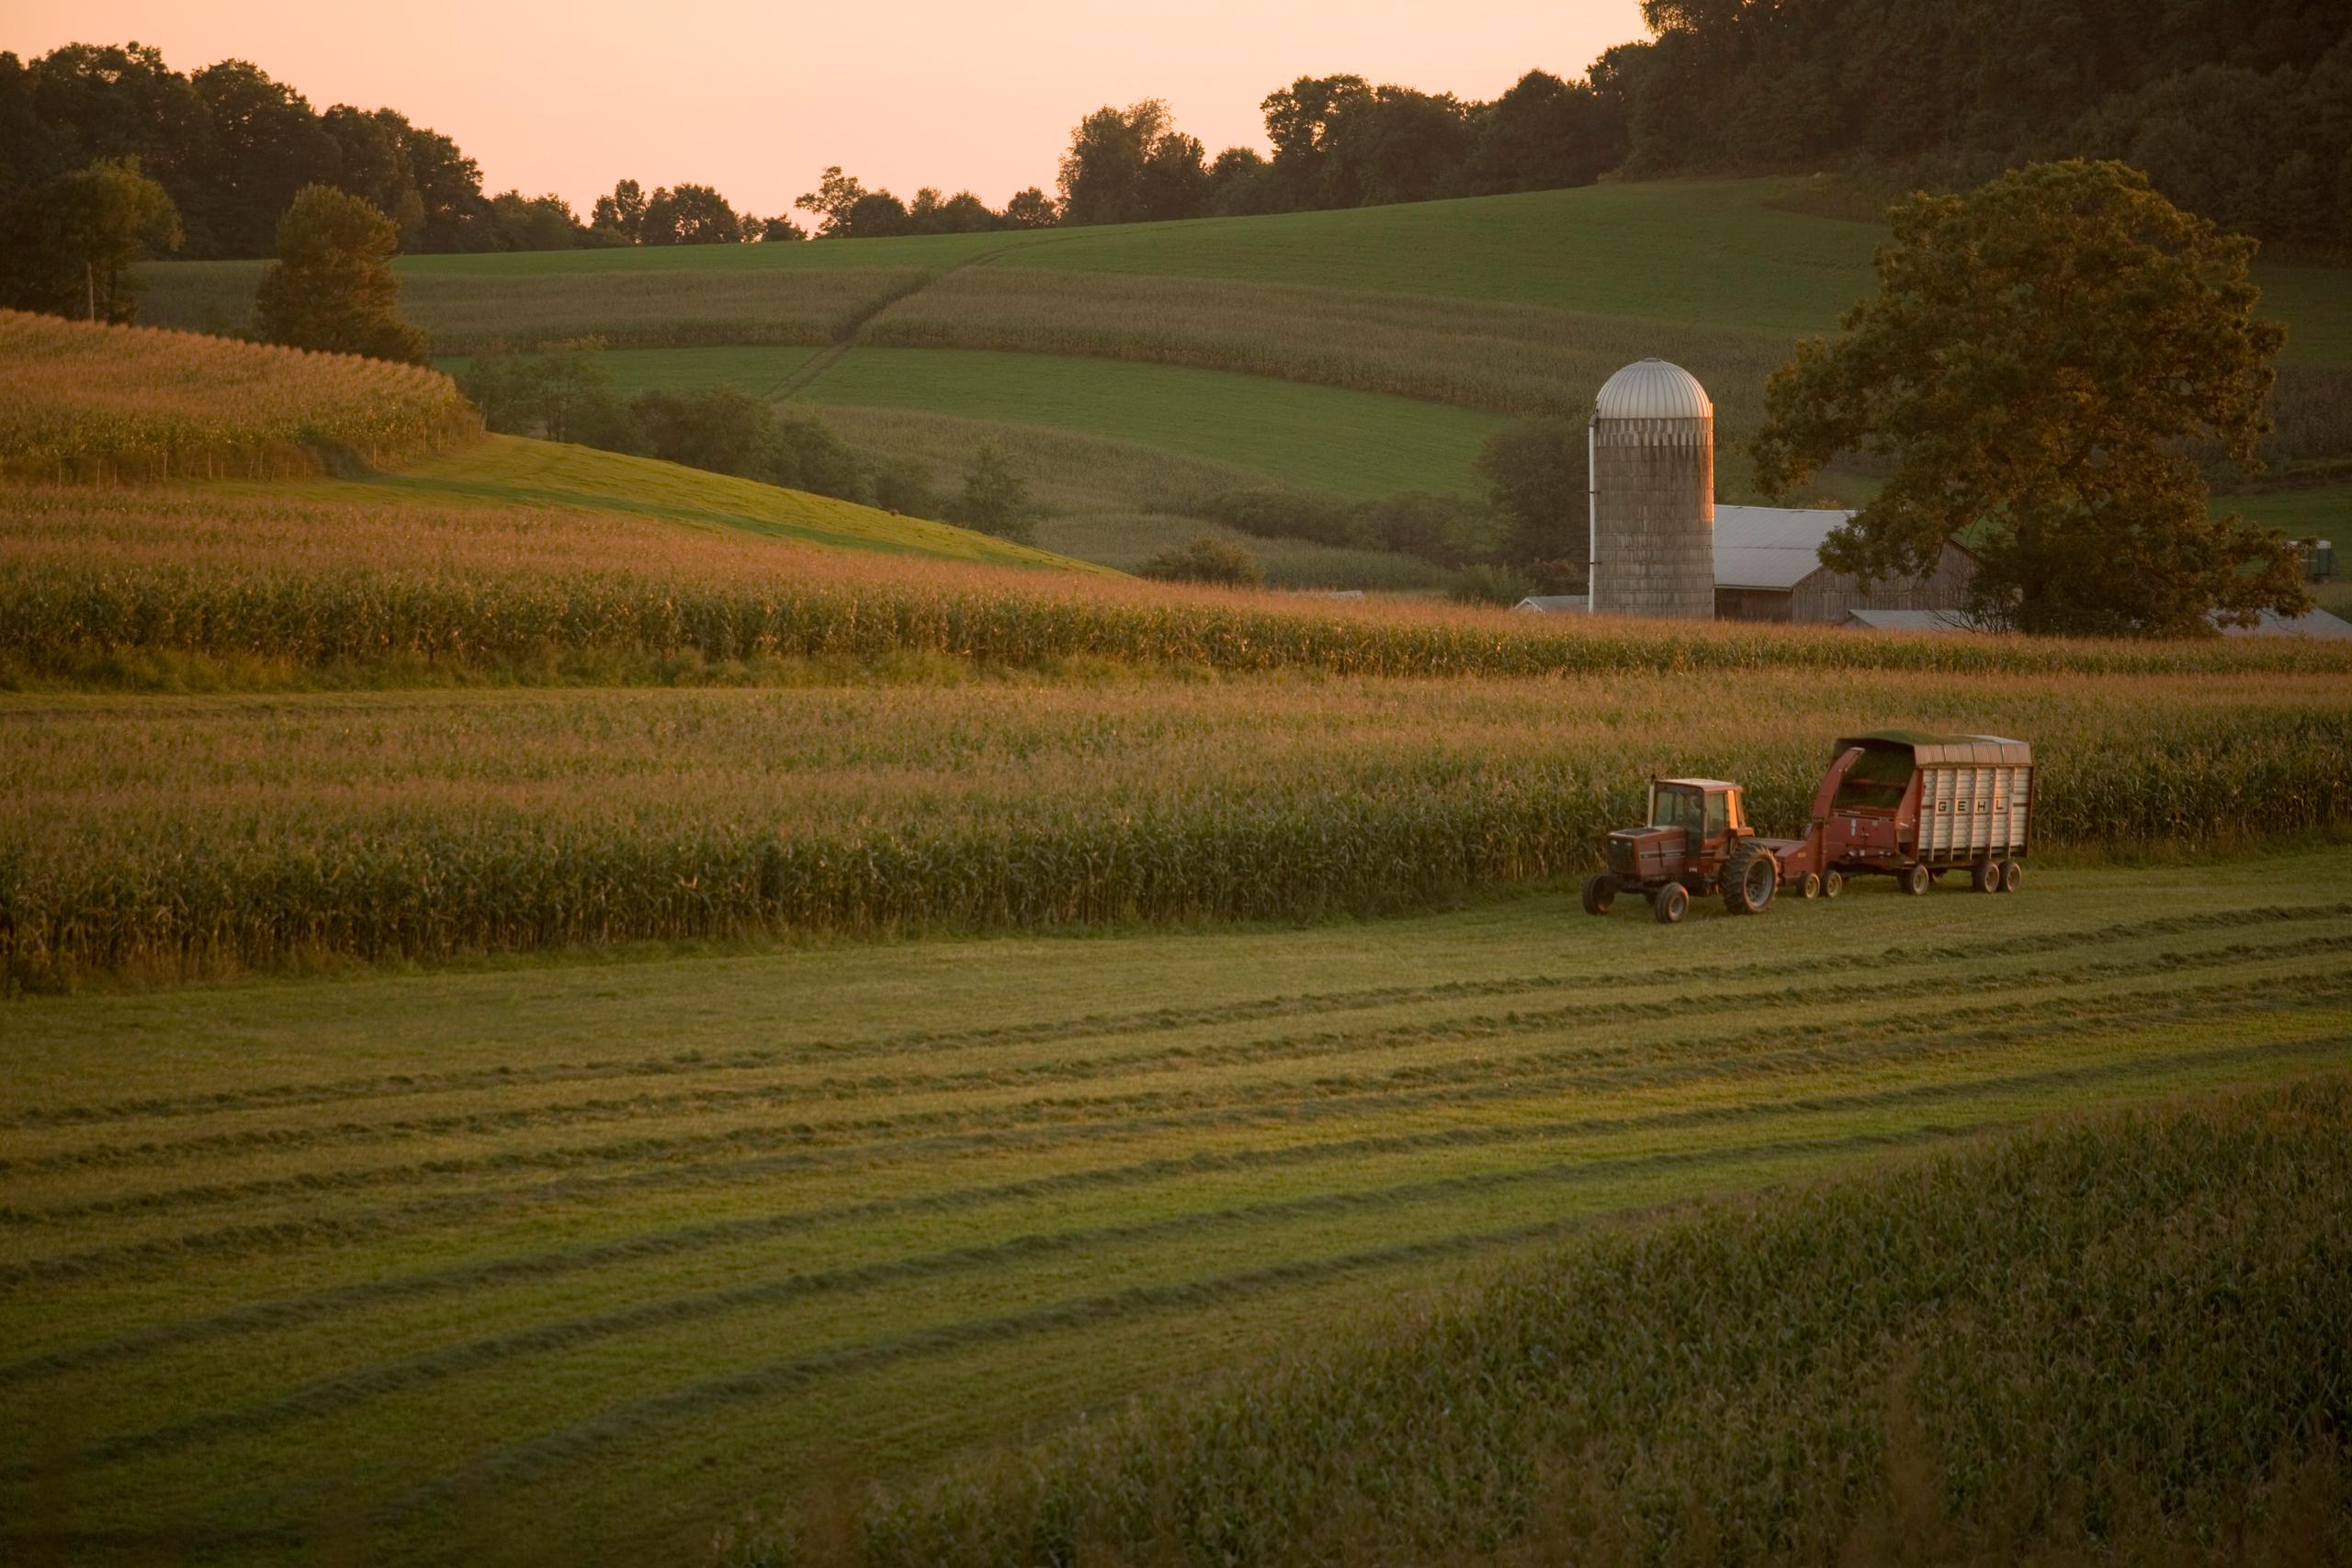 A tractor harvests corn in a field in Brookville, Pennsylvania, USA